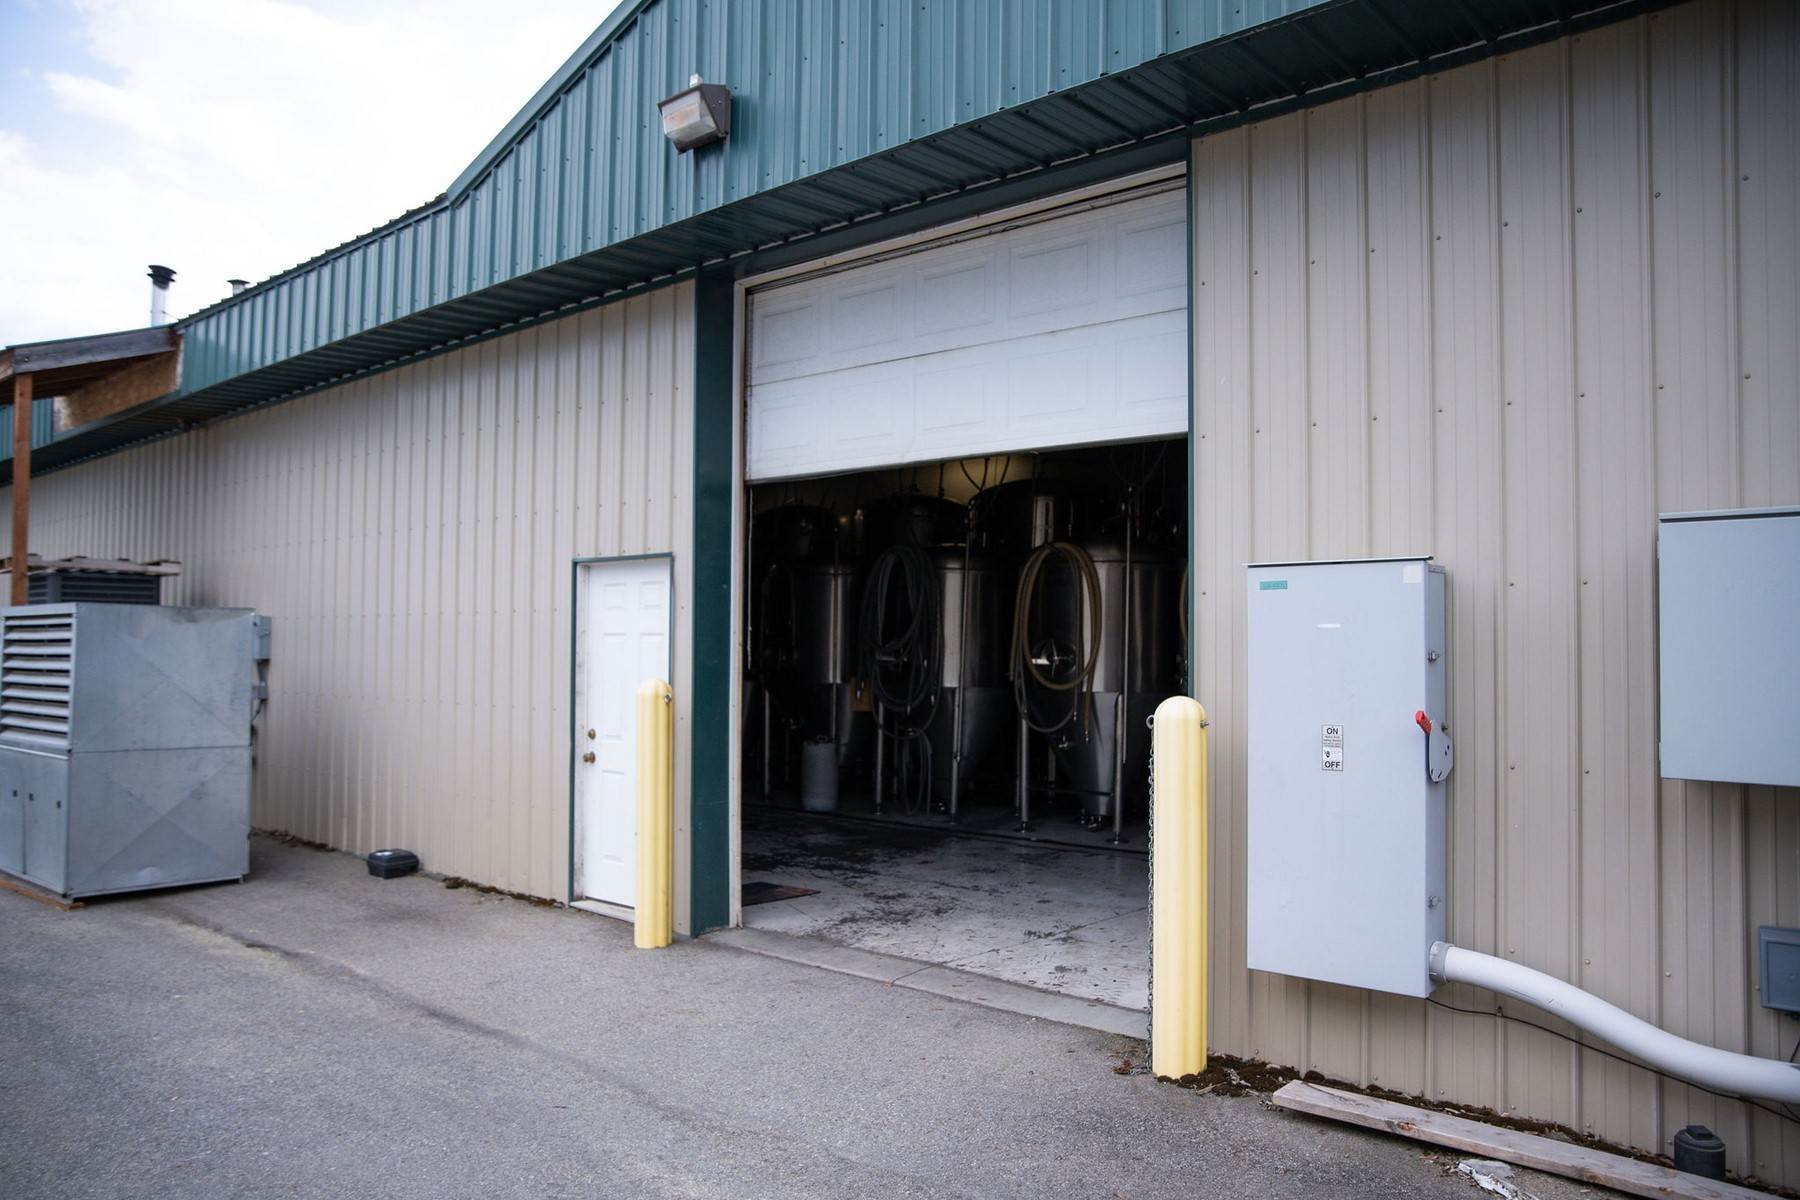 44. Property for Sale at 6180 E Seltice Way Suite 102 - Commercial Brewery 6180 E Seltice Way-Commercial Brewery Post Falls, Idaho 83854 United States